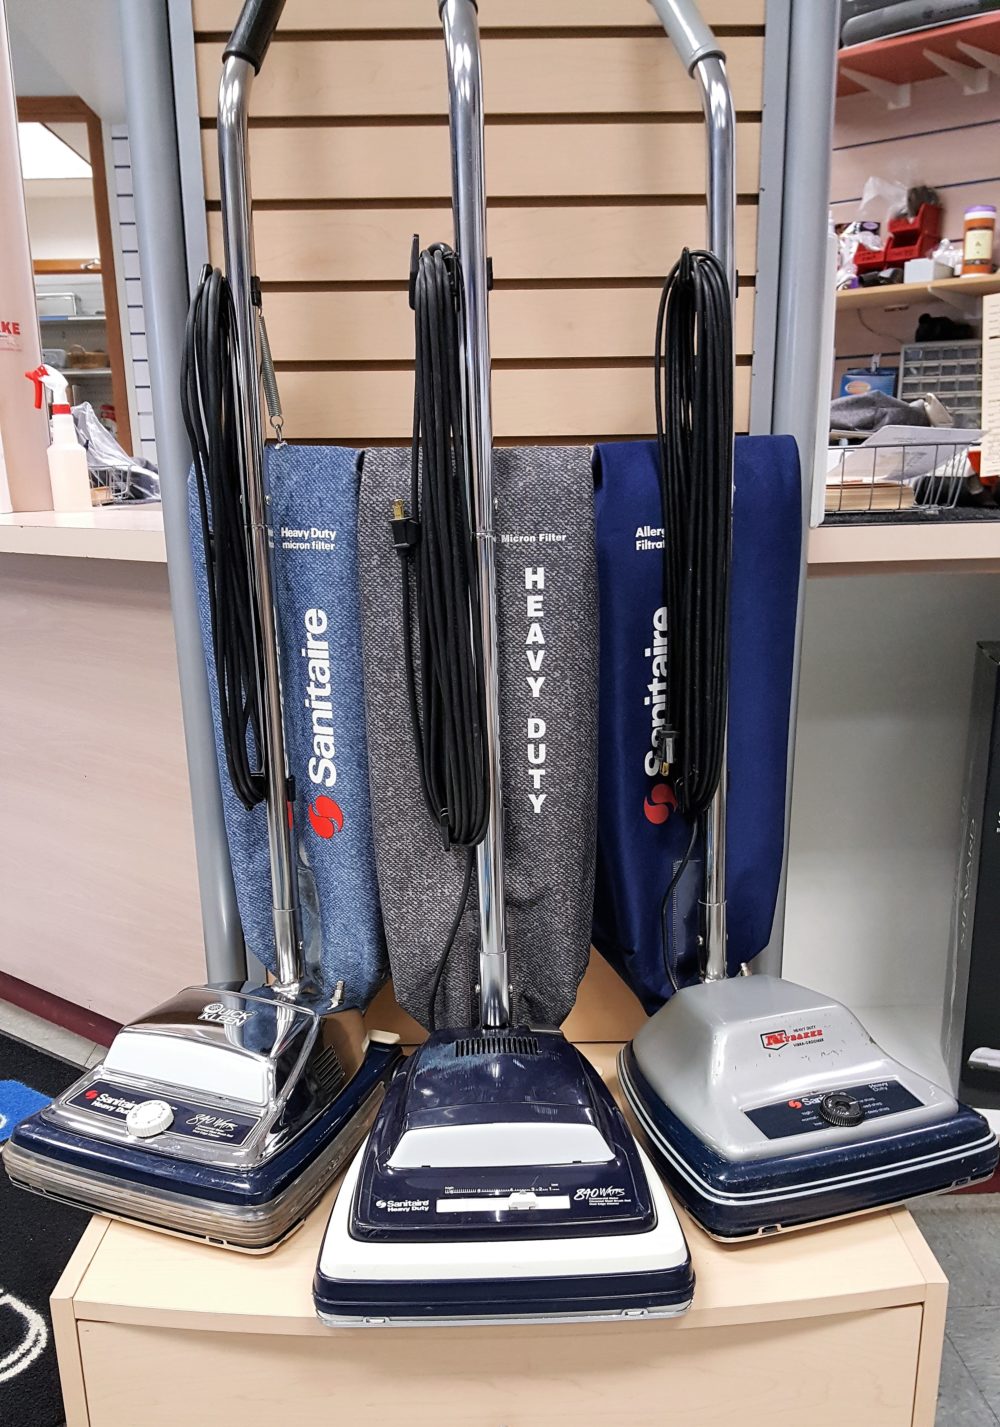 Used vacuums for sale